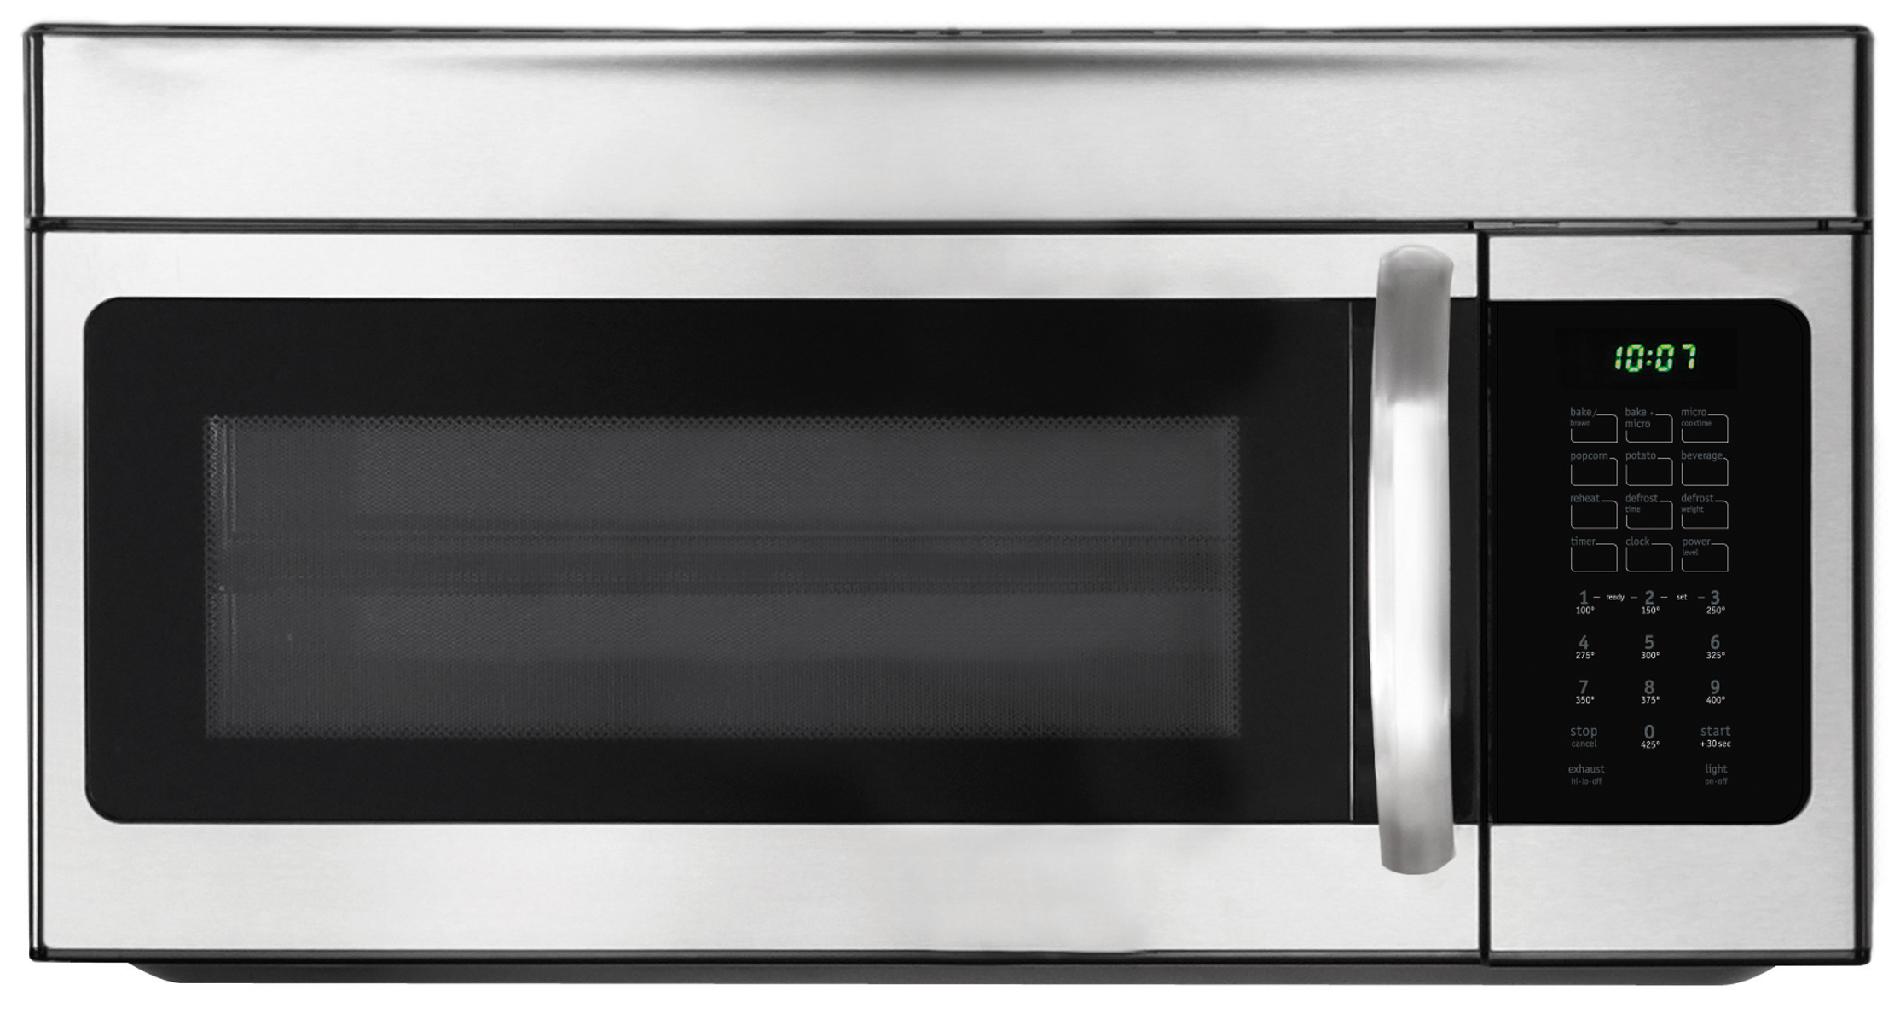 Frigidaire 1.5 cu. ft. Over-the-Range Microwave w/ Convection - Stainless Steel